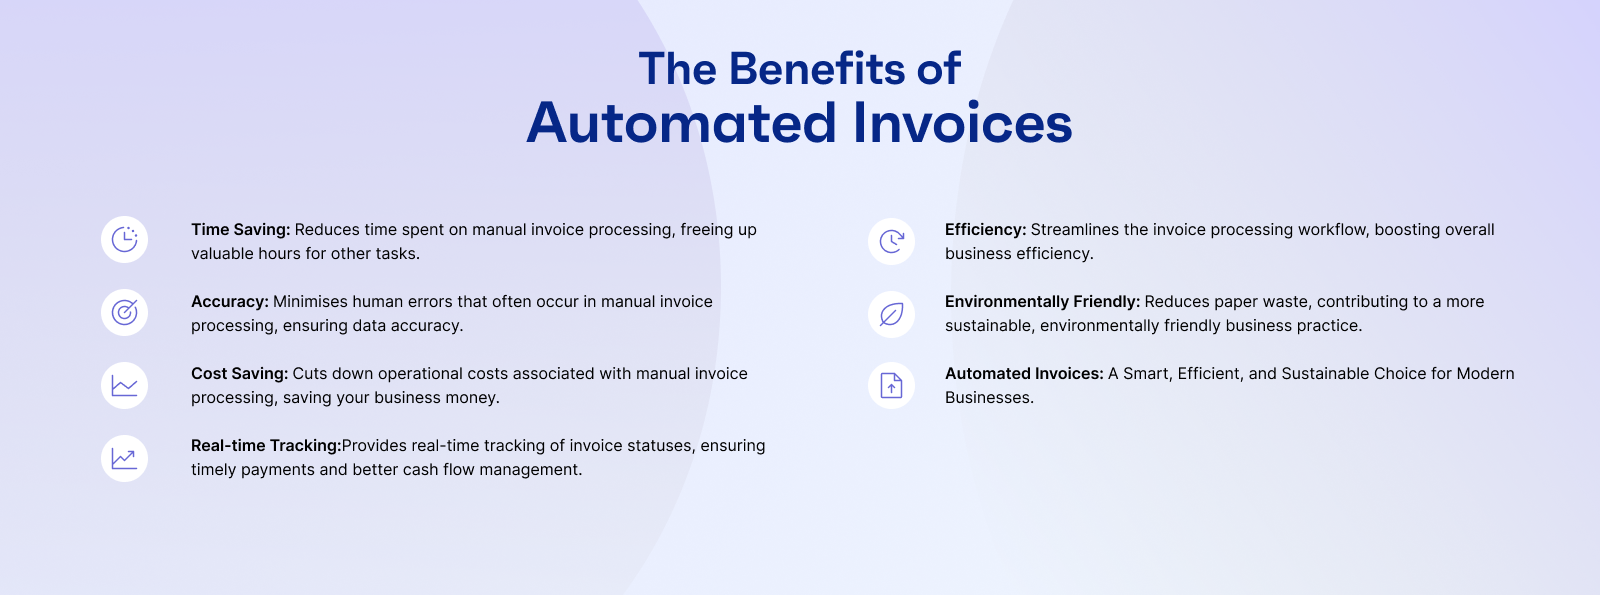 image-benefits-automated-invoices (1).png